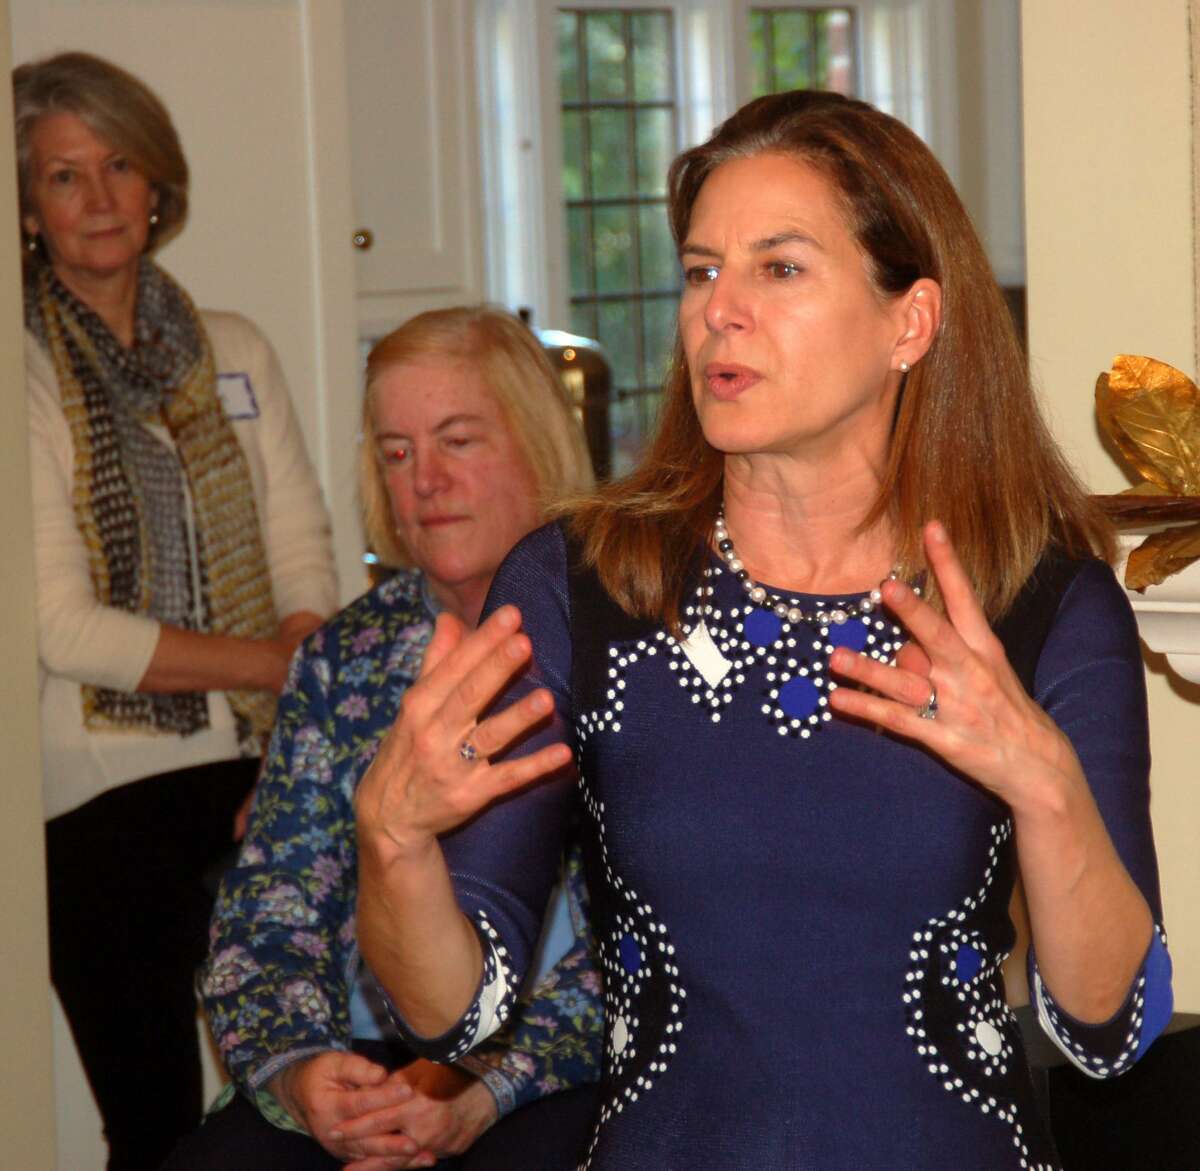 Democratic lieutenant governor candidate Susan Bysiewicz attended a campaign event in Greenwich on Tuesday, Oct. 23, 2018. Bysiewicz said she and Democratic gubernatorial candidate Ned Lamont are feeling optimistic about the election but everyone needs to get out and vote.